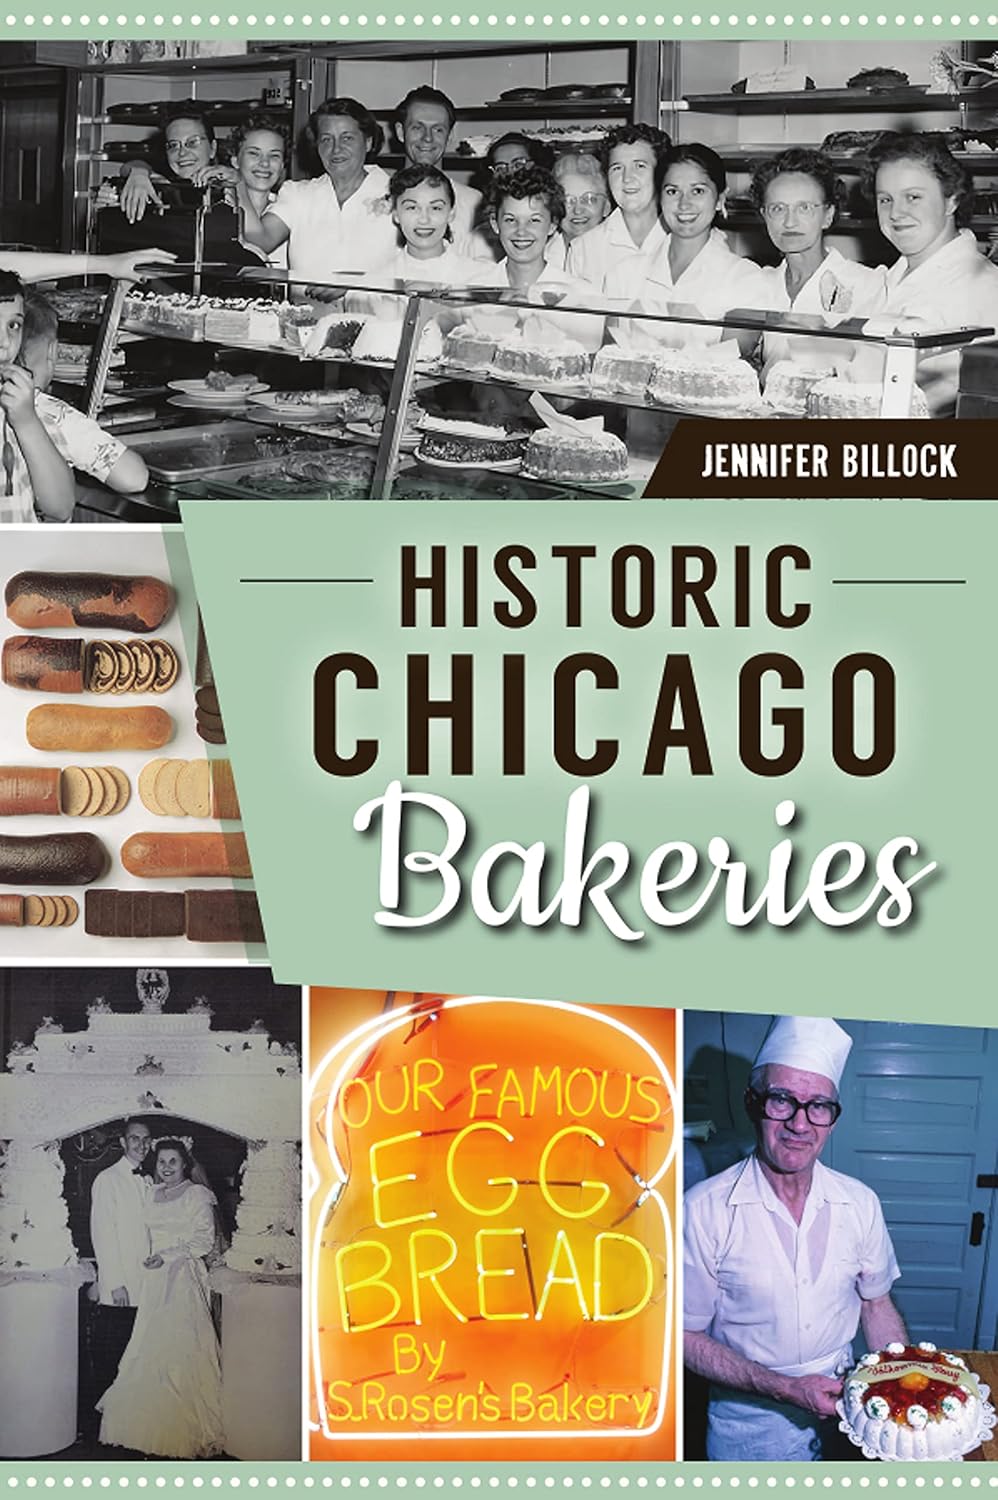 Image for "Historic Chicago Bakeries"